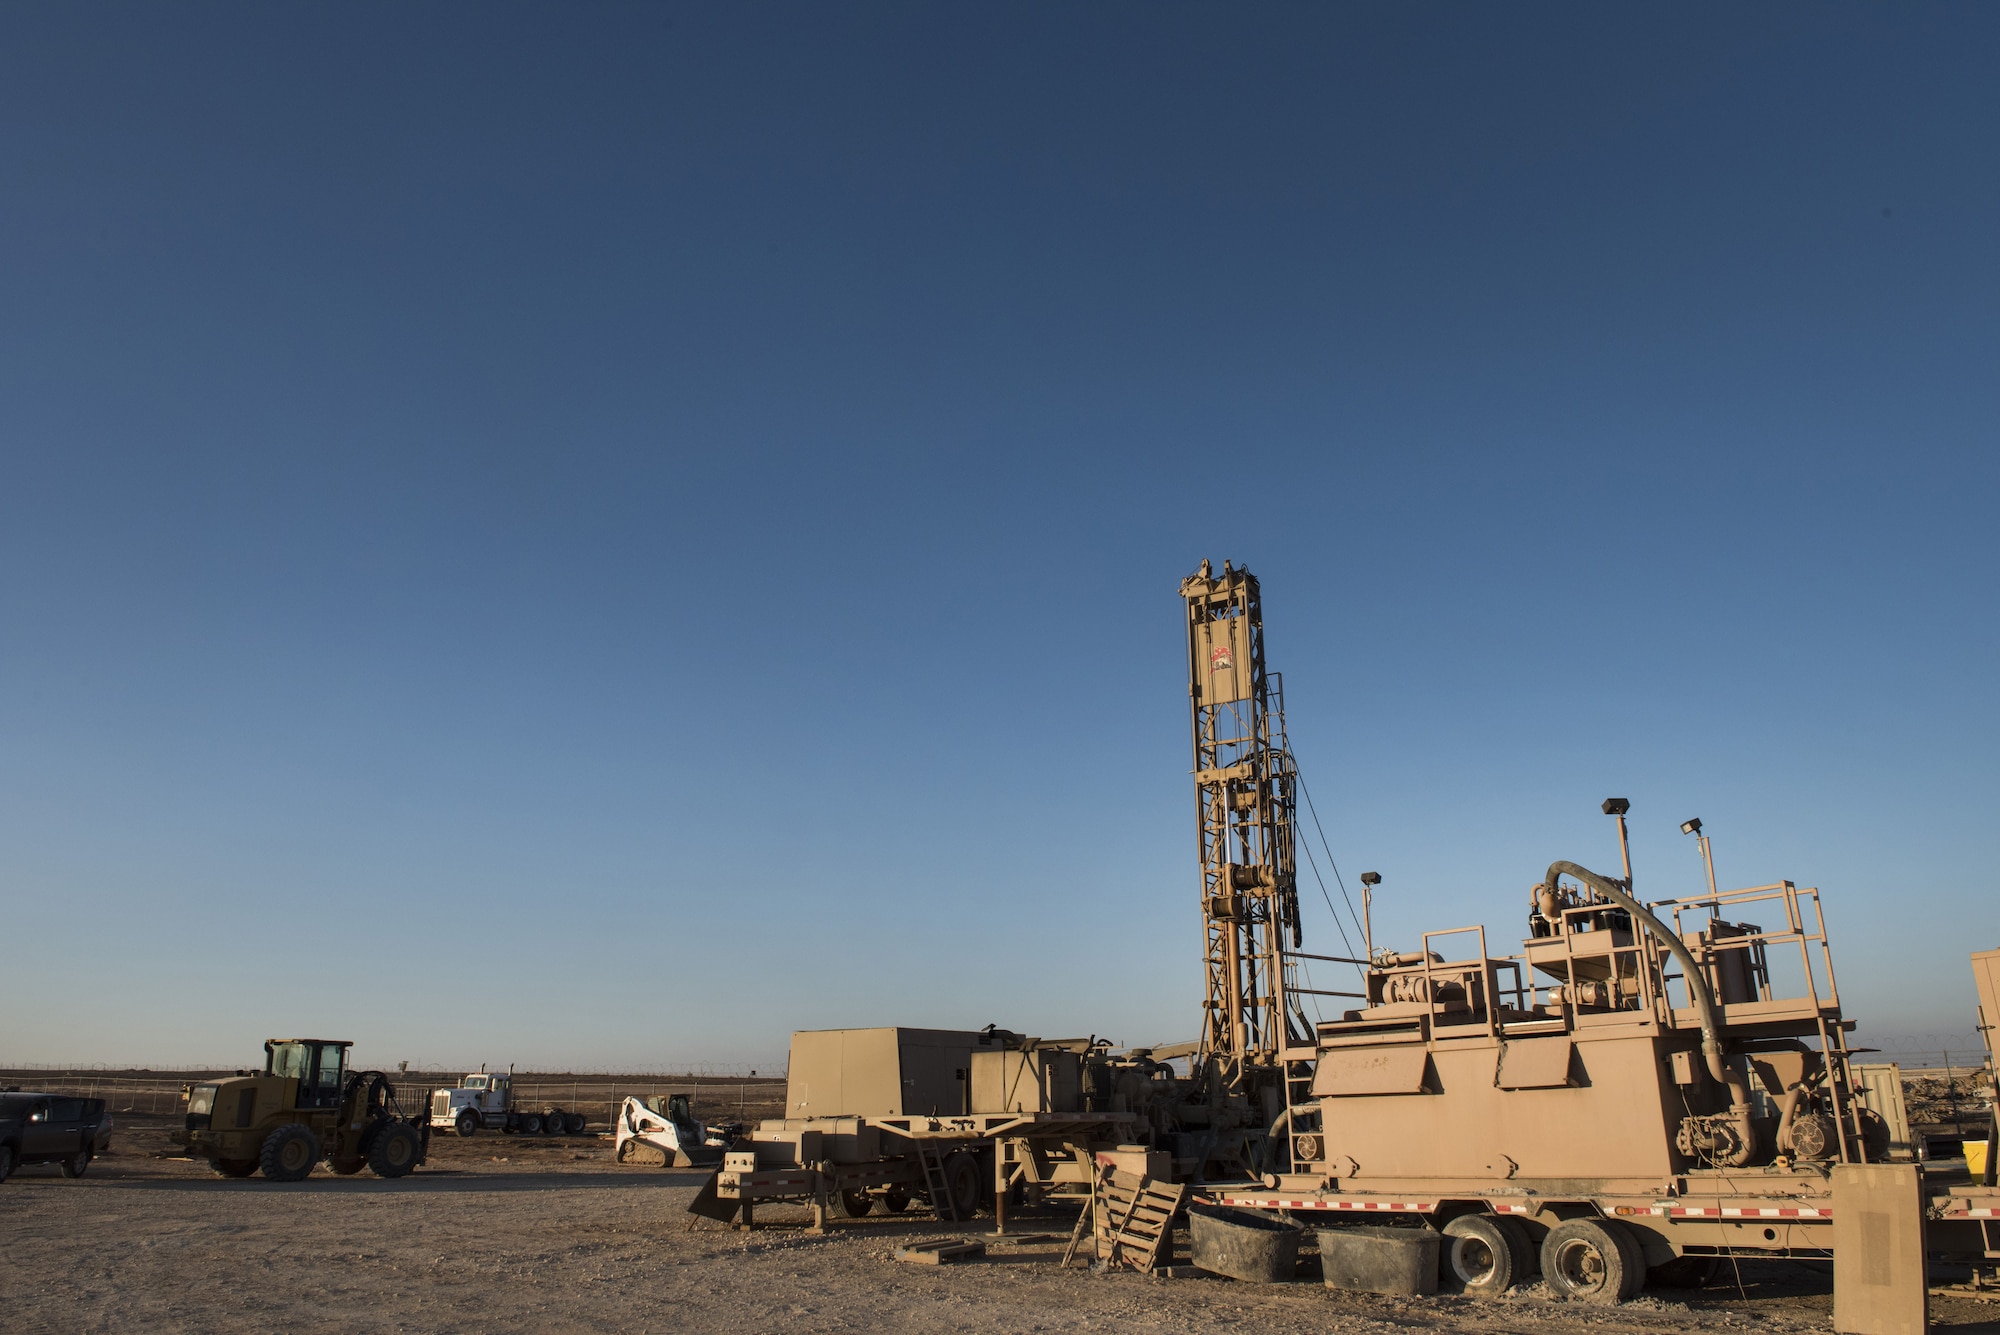 The sun sets on a 557th Expeditionary RED HORSE Squadron drill site January 31, 2018 at an undisclosed location in Southwest Asia. The project entails the development of 3 new wells intended to support an enduring coalition presence in the region. (U.S. Air Force photo by Staff Sgt. Joshua Kleinholz)